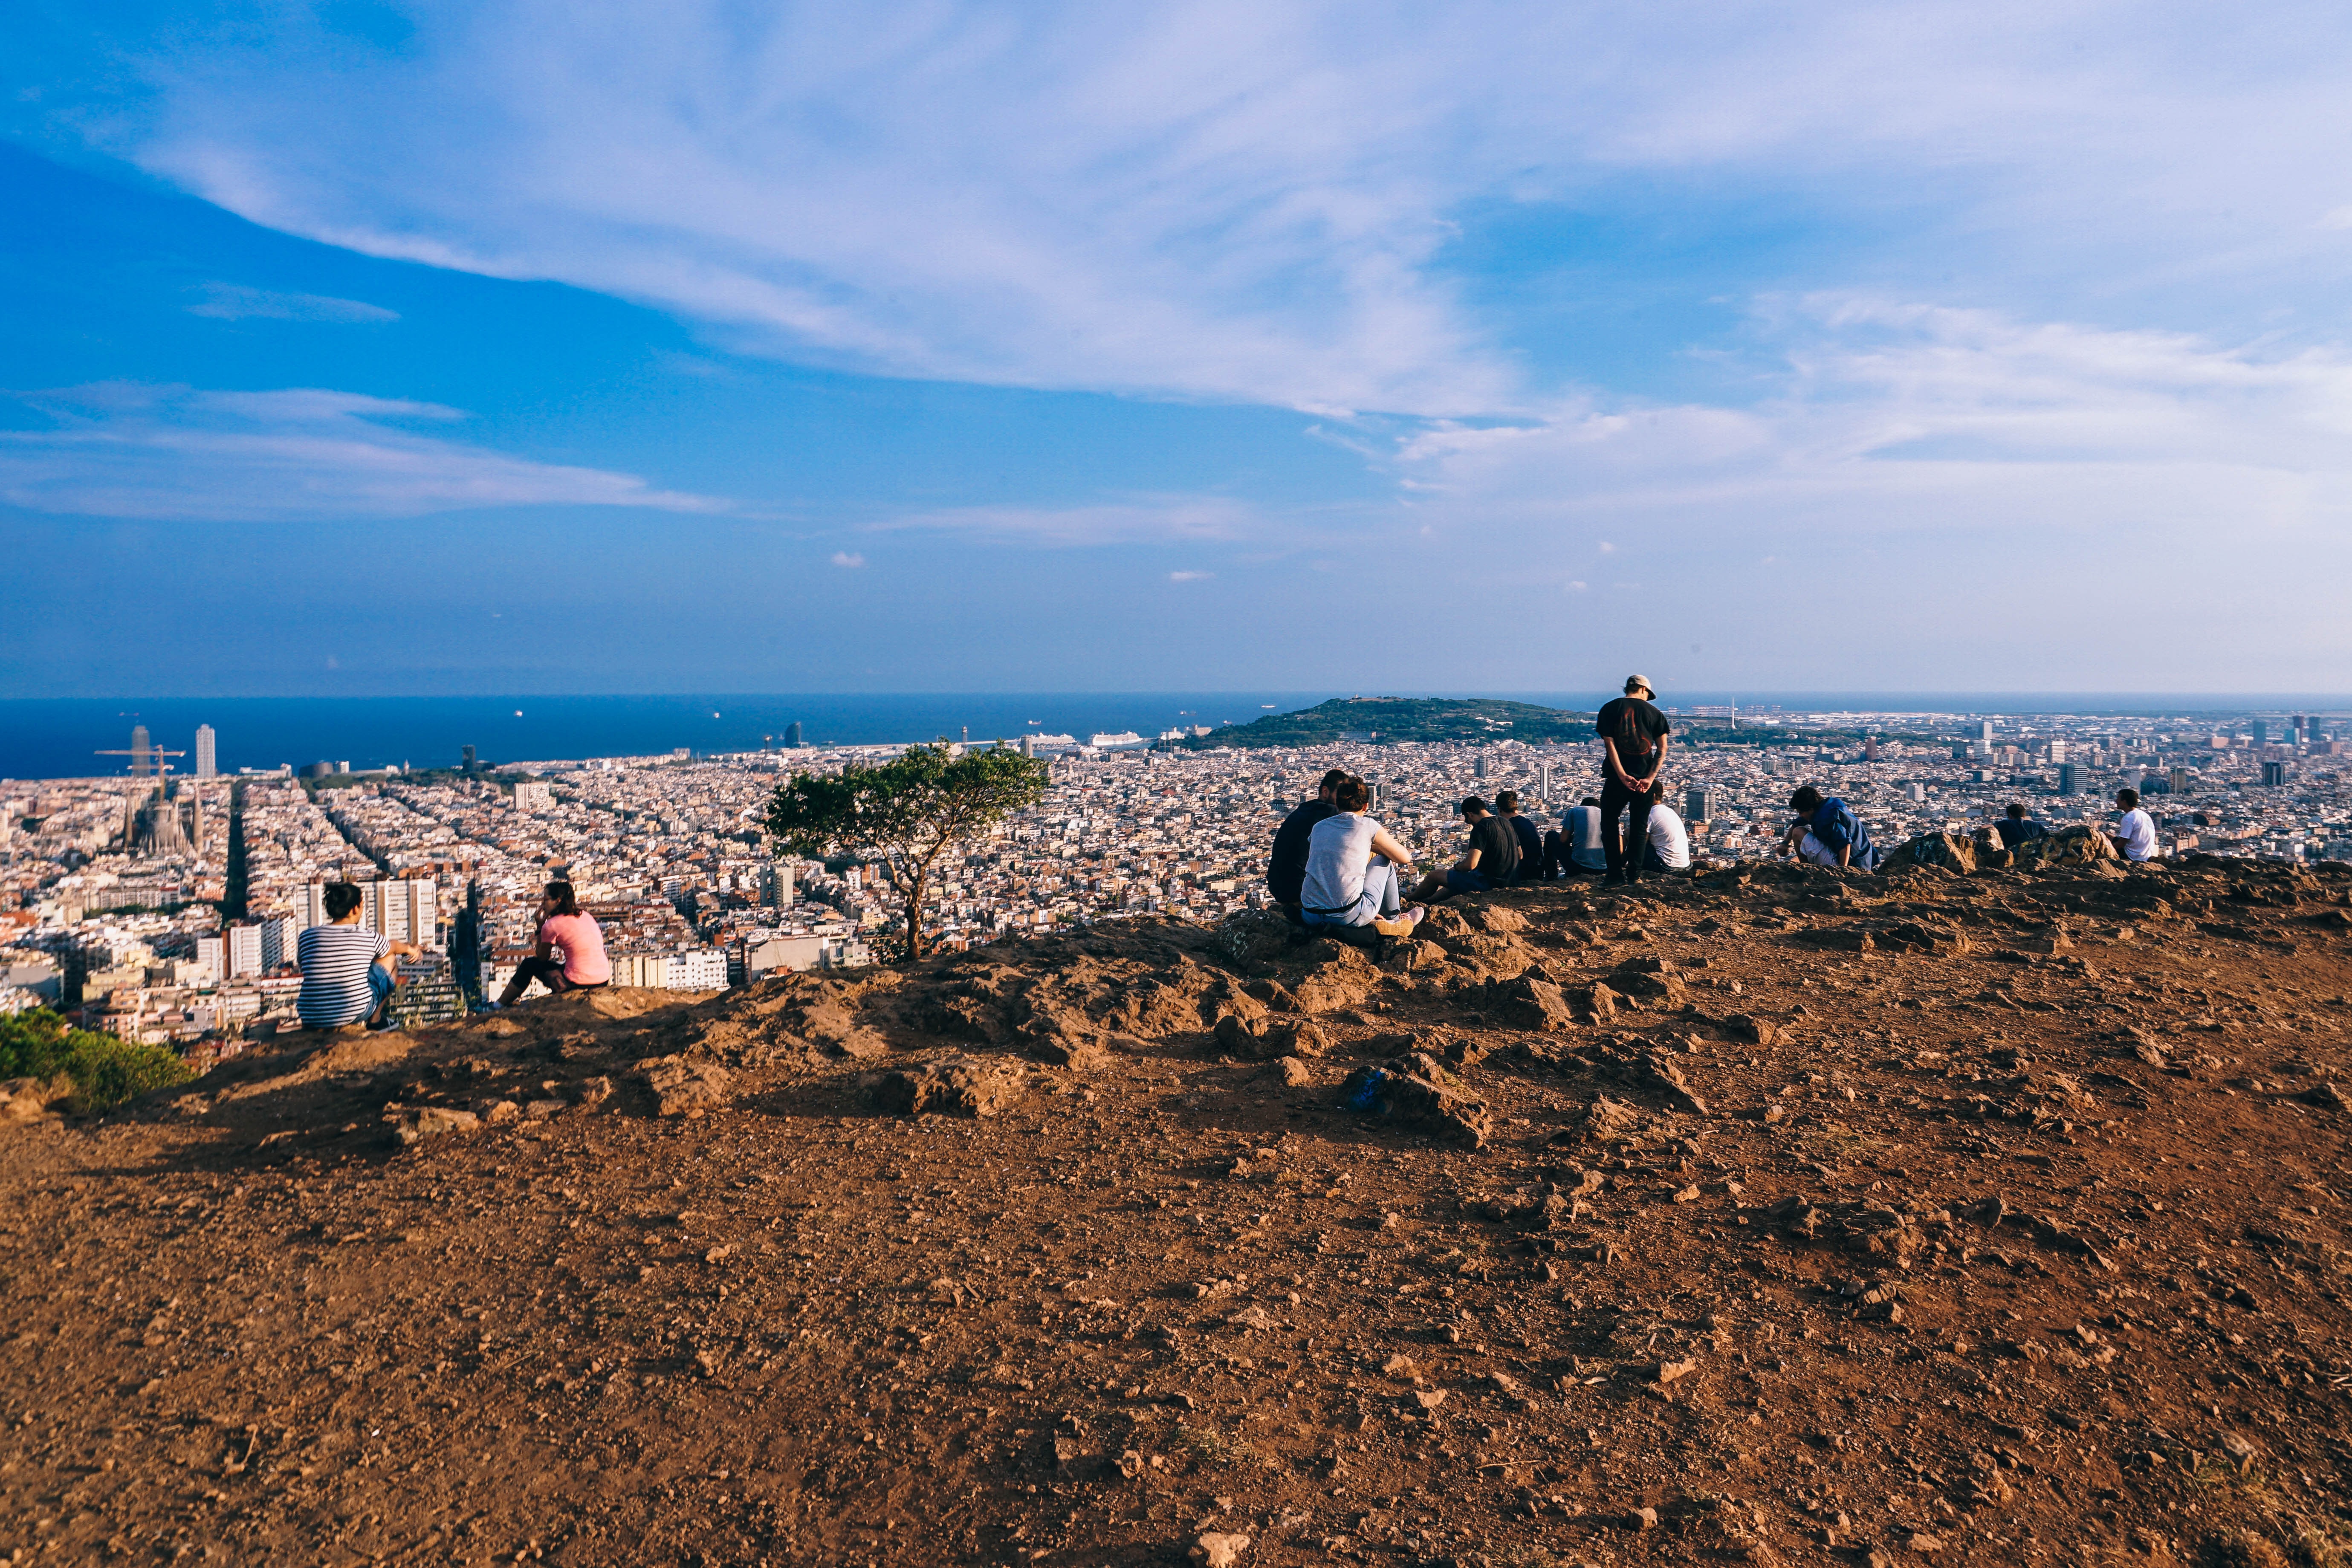 group of people on cliff side with city view during daytime